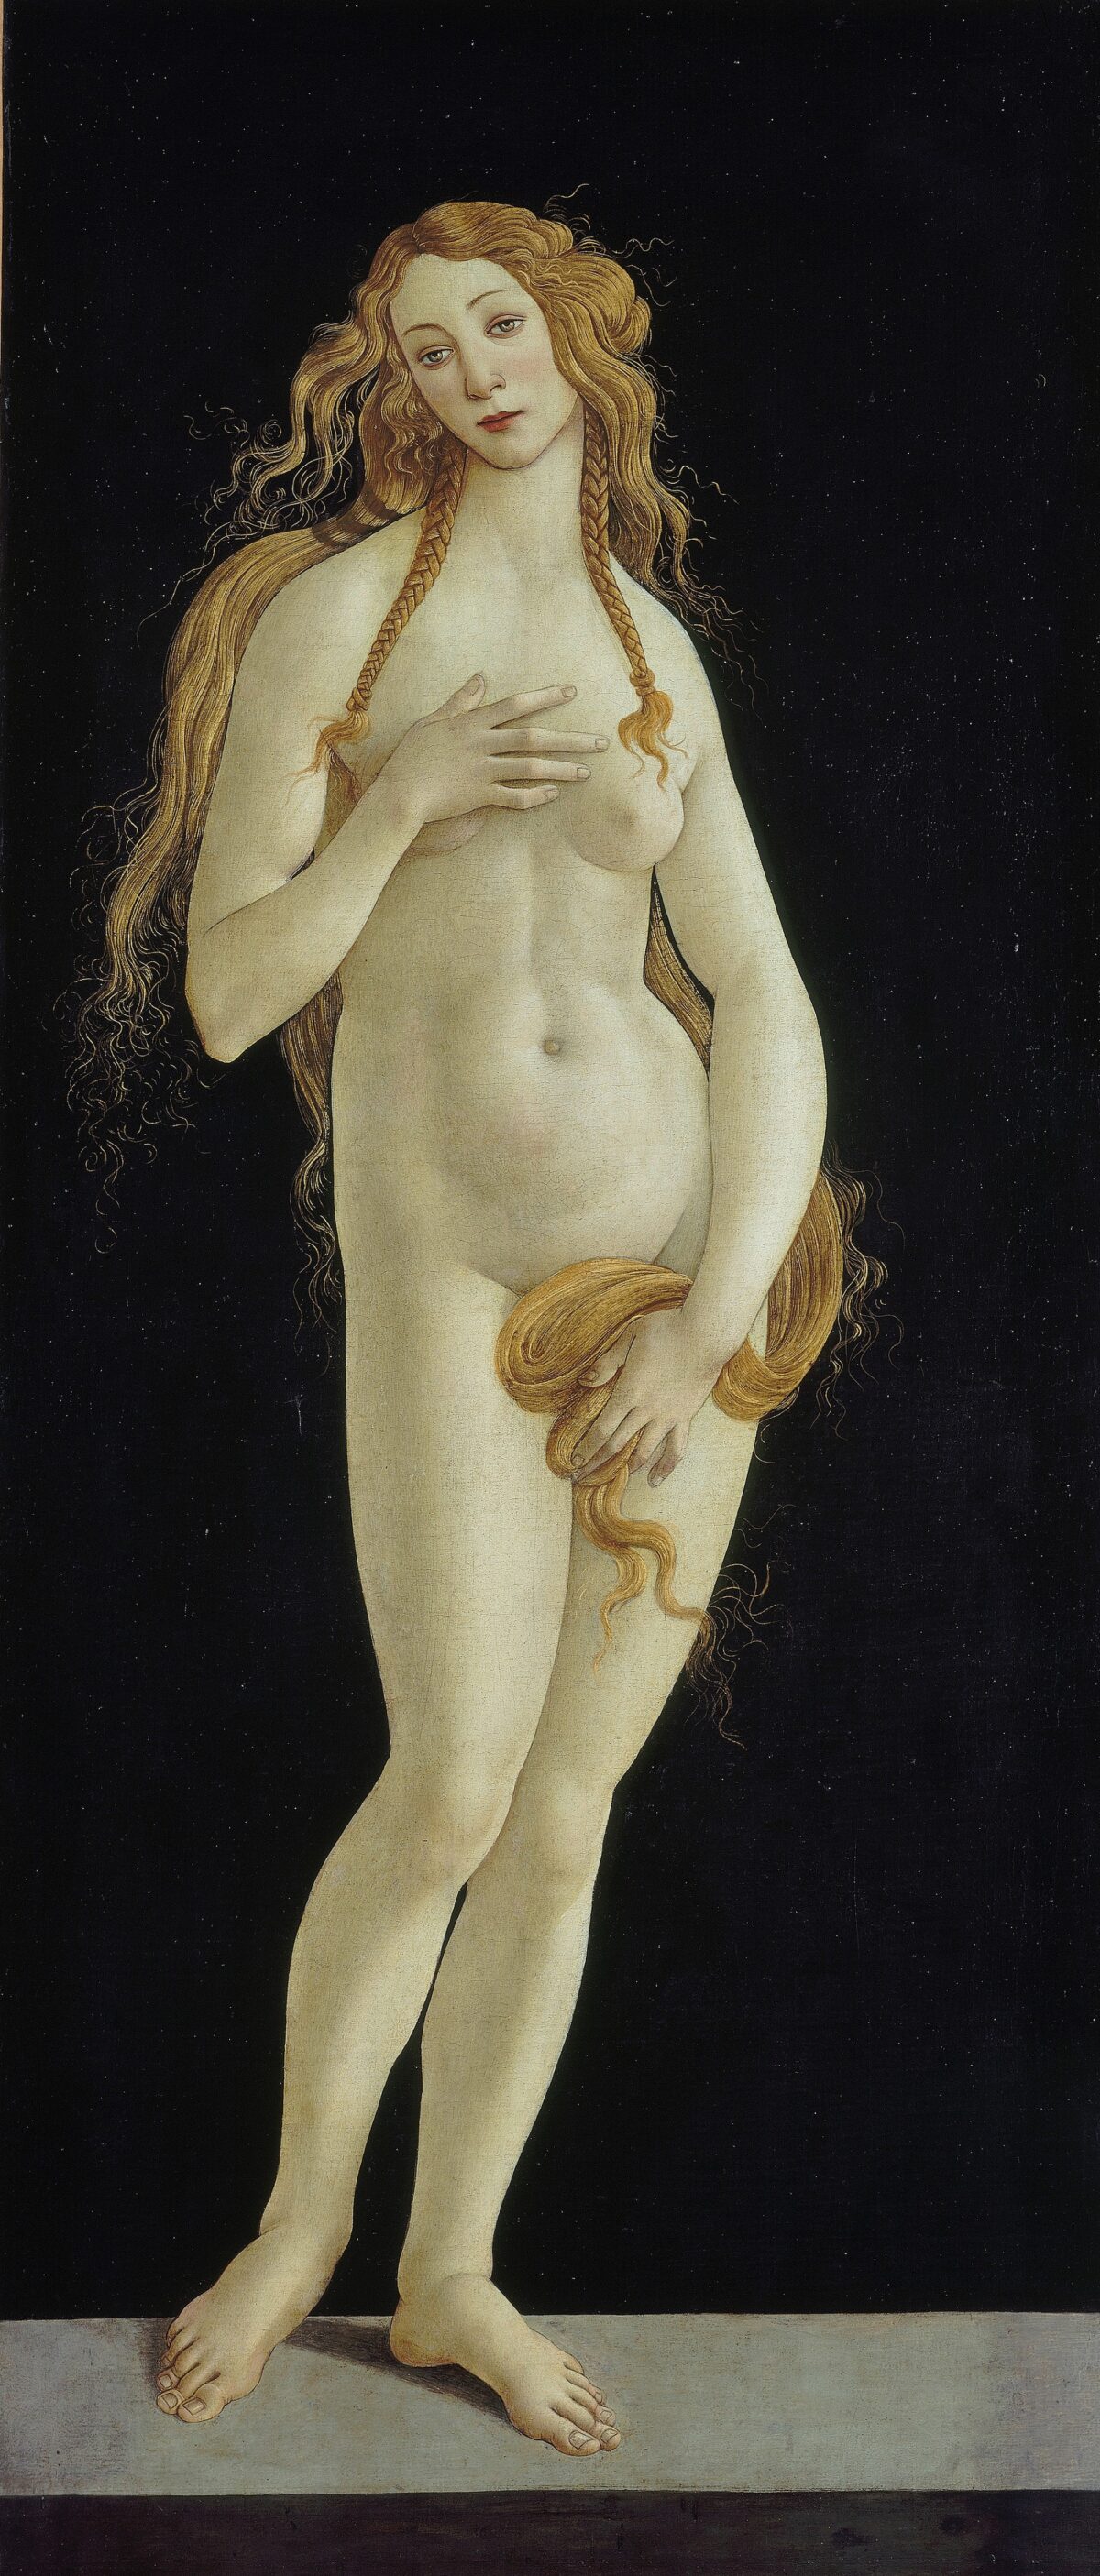 Detail of “Venus Pudica (‘Modest Venus’),” circa 1485–1490, by Botticelli. Oil on canvas; 62 1/4 inches by 27 inches. Art Gallery, State Museums of Berlin, Berlin. (BPK, Berlin, Dist. RMN-Grand Palais/Jörg P. Anders)